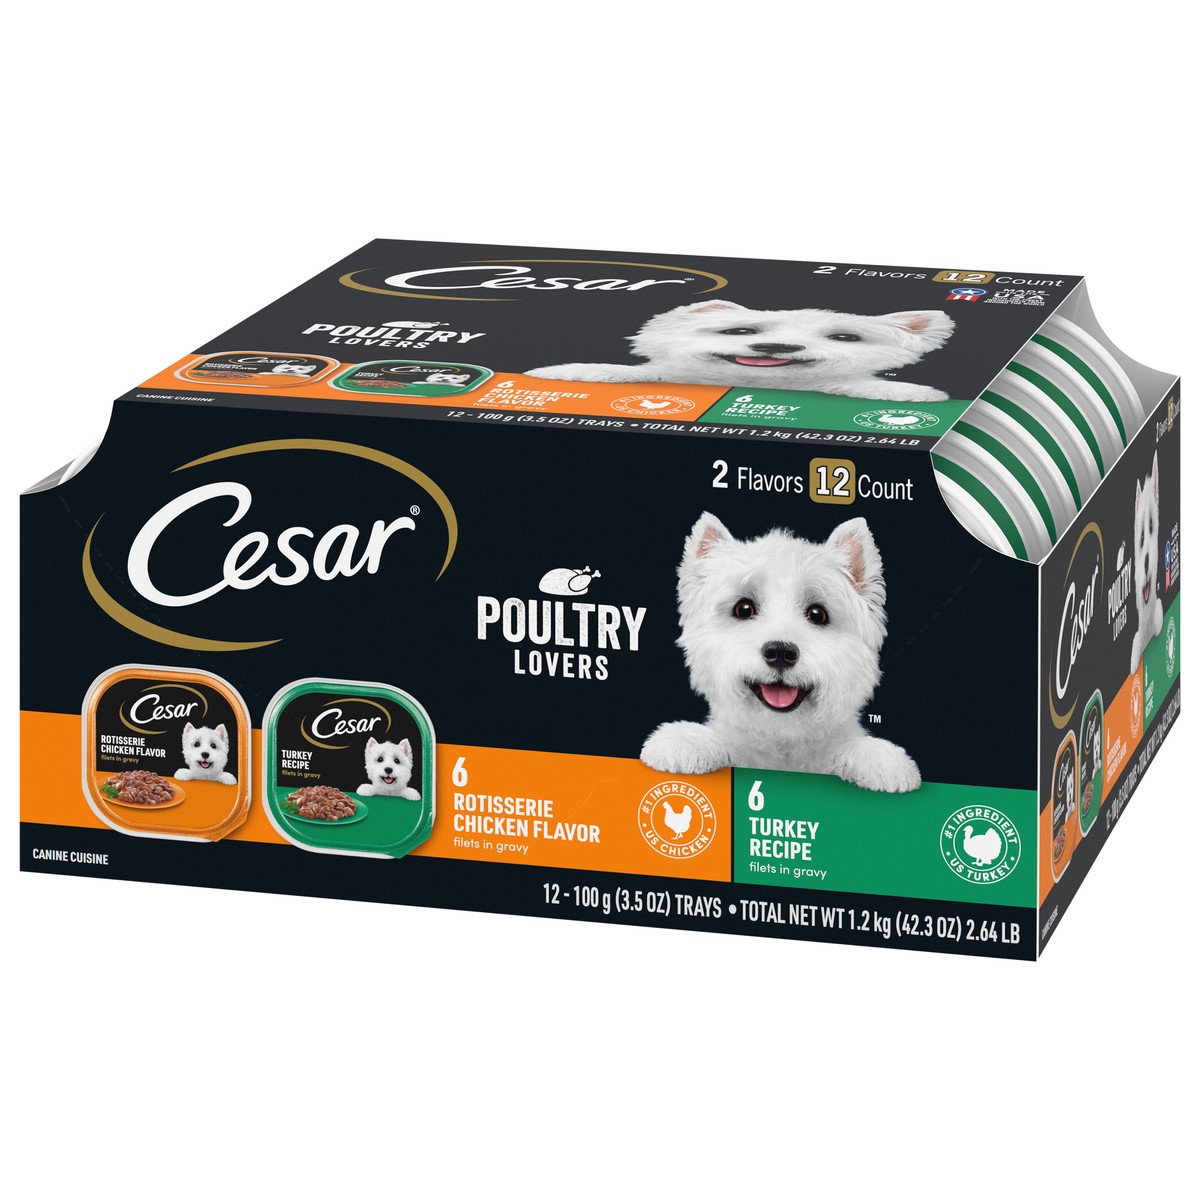 slide 12 of 15, Cesar Poultry Lovers Canine Cuisine 12 - 3.5 oz Trays, 12 ct